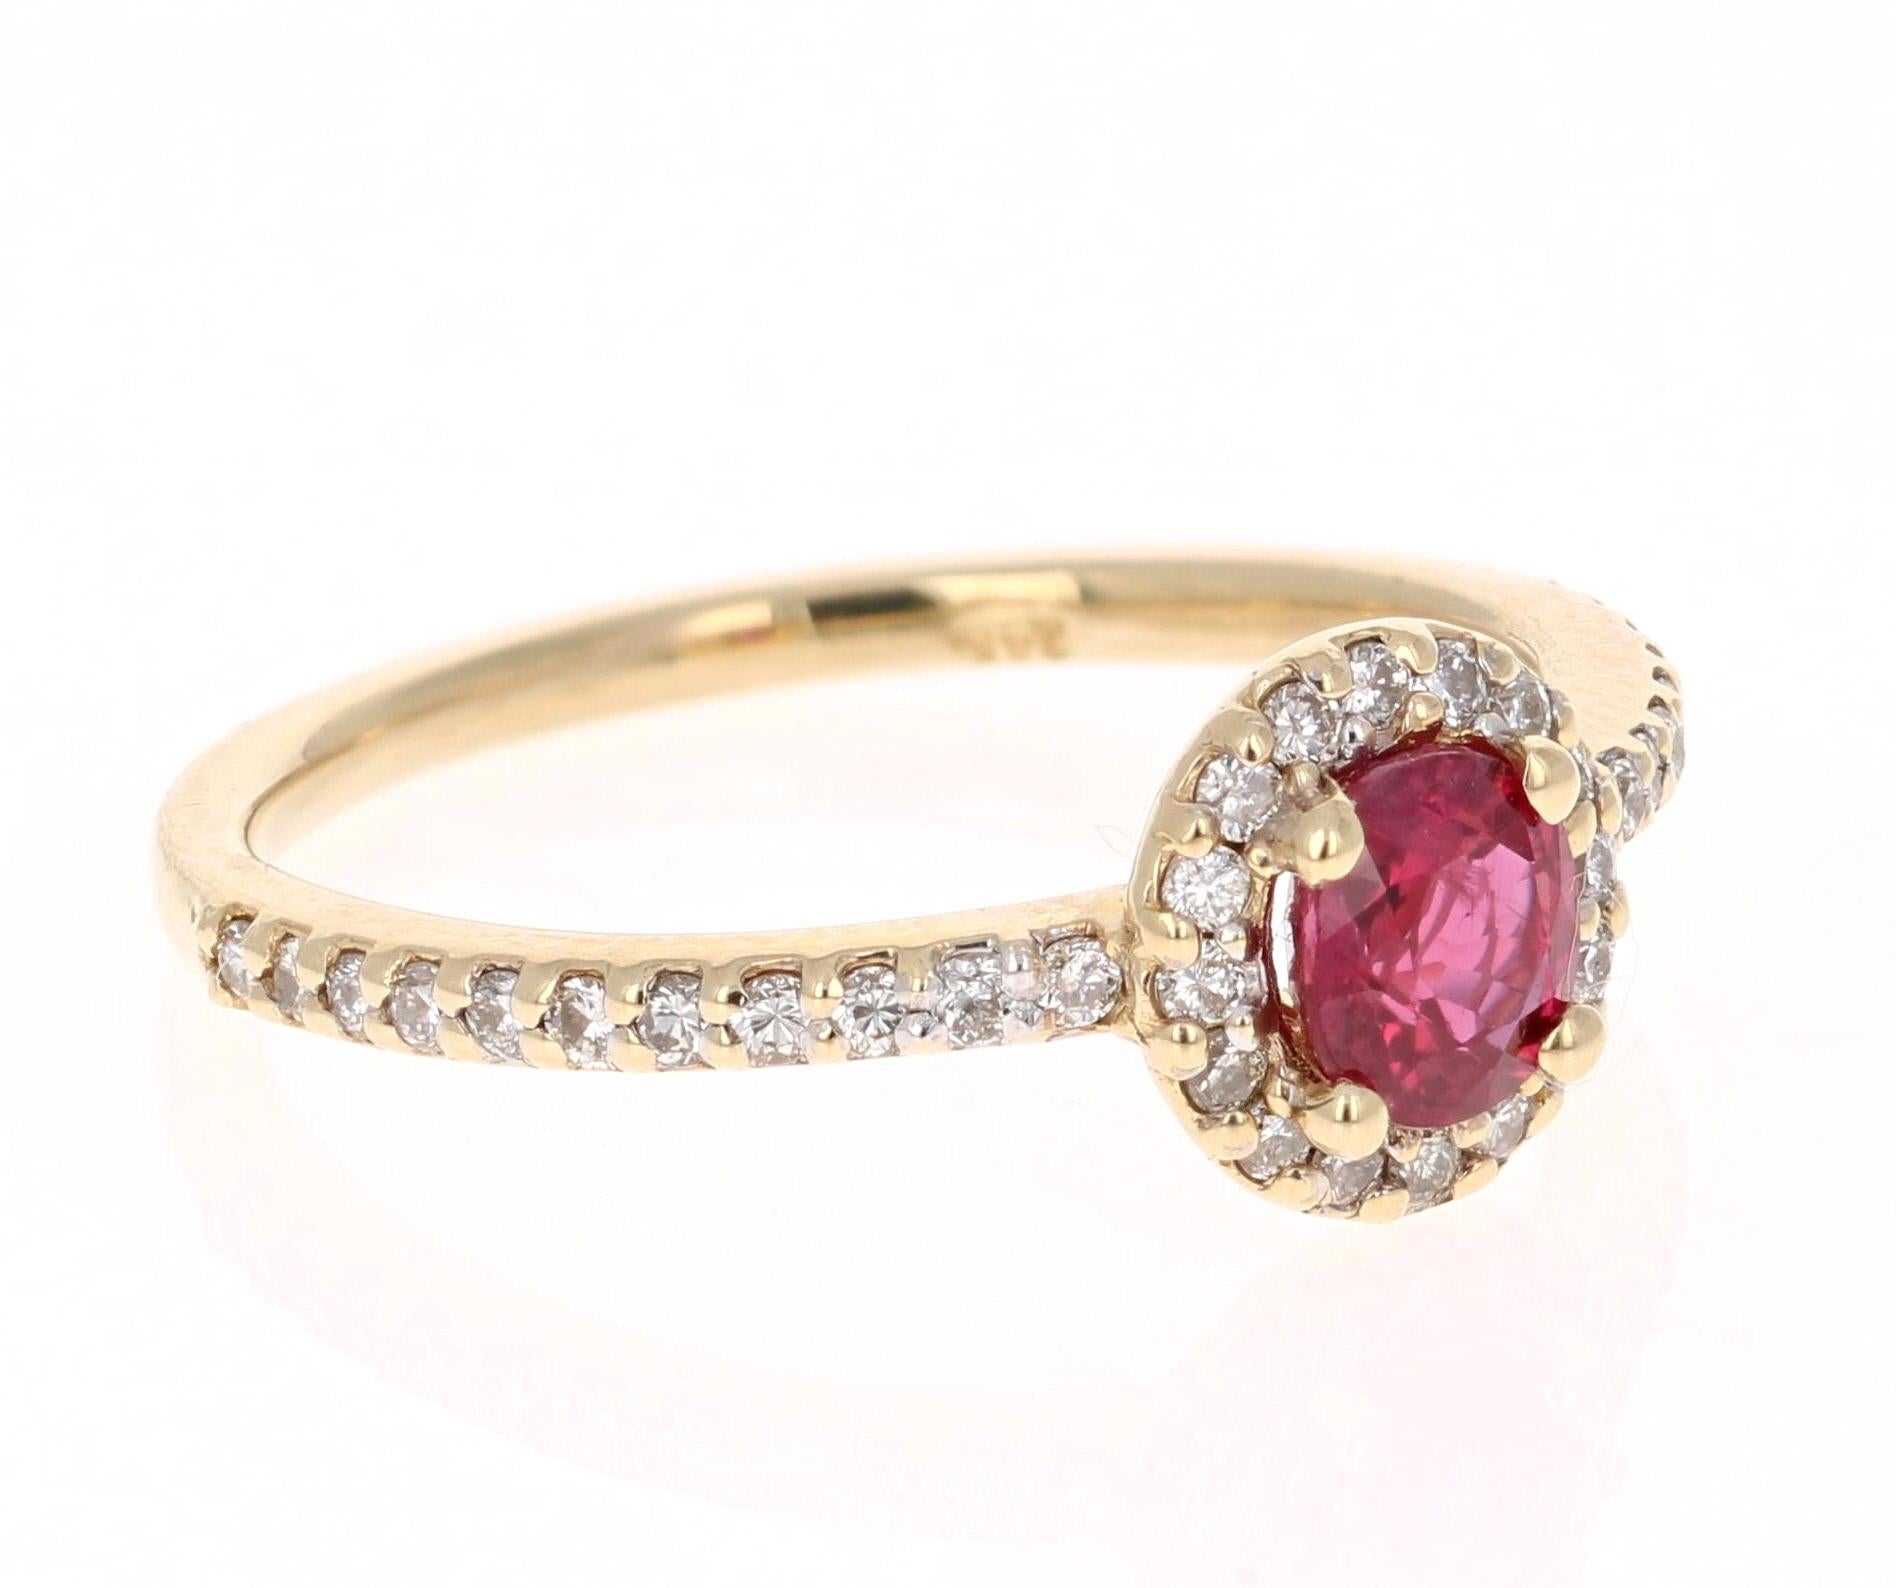 Simply beautiful Ruby Diamond Ring with a Round Cut 0.70 Carat Burmese Ruby which is surrounded by 38 Round Cut Diamonds that weigh 0.31 carats. The total carat weight of the ring is 1.01 carats. The clarity and color of the diamonds are VS-H.

The